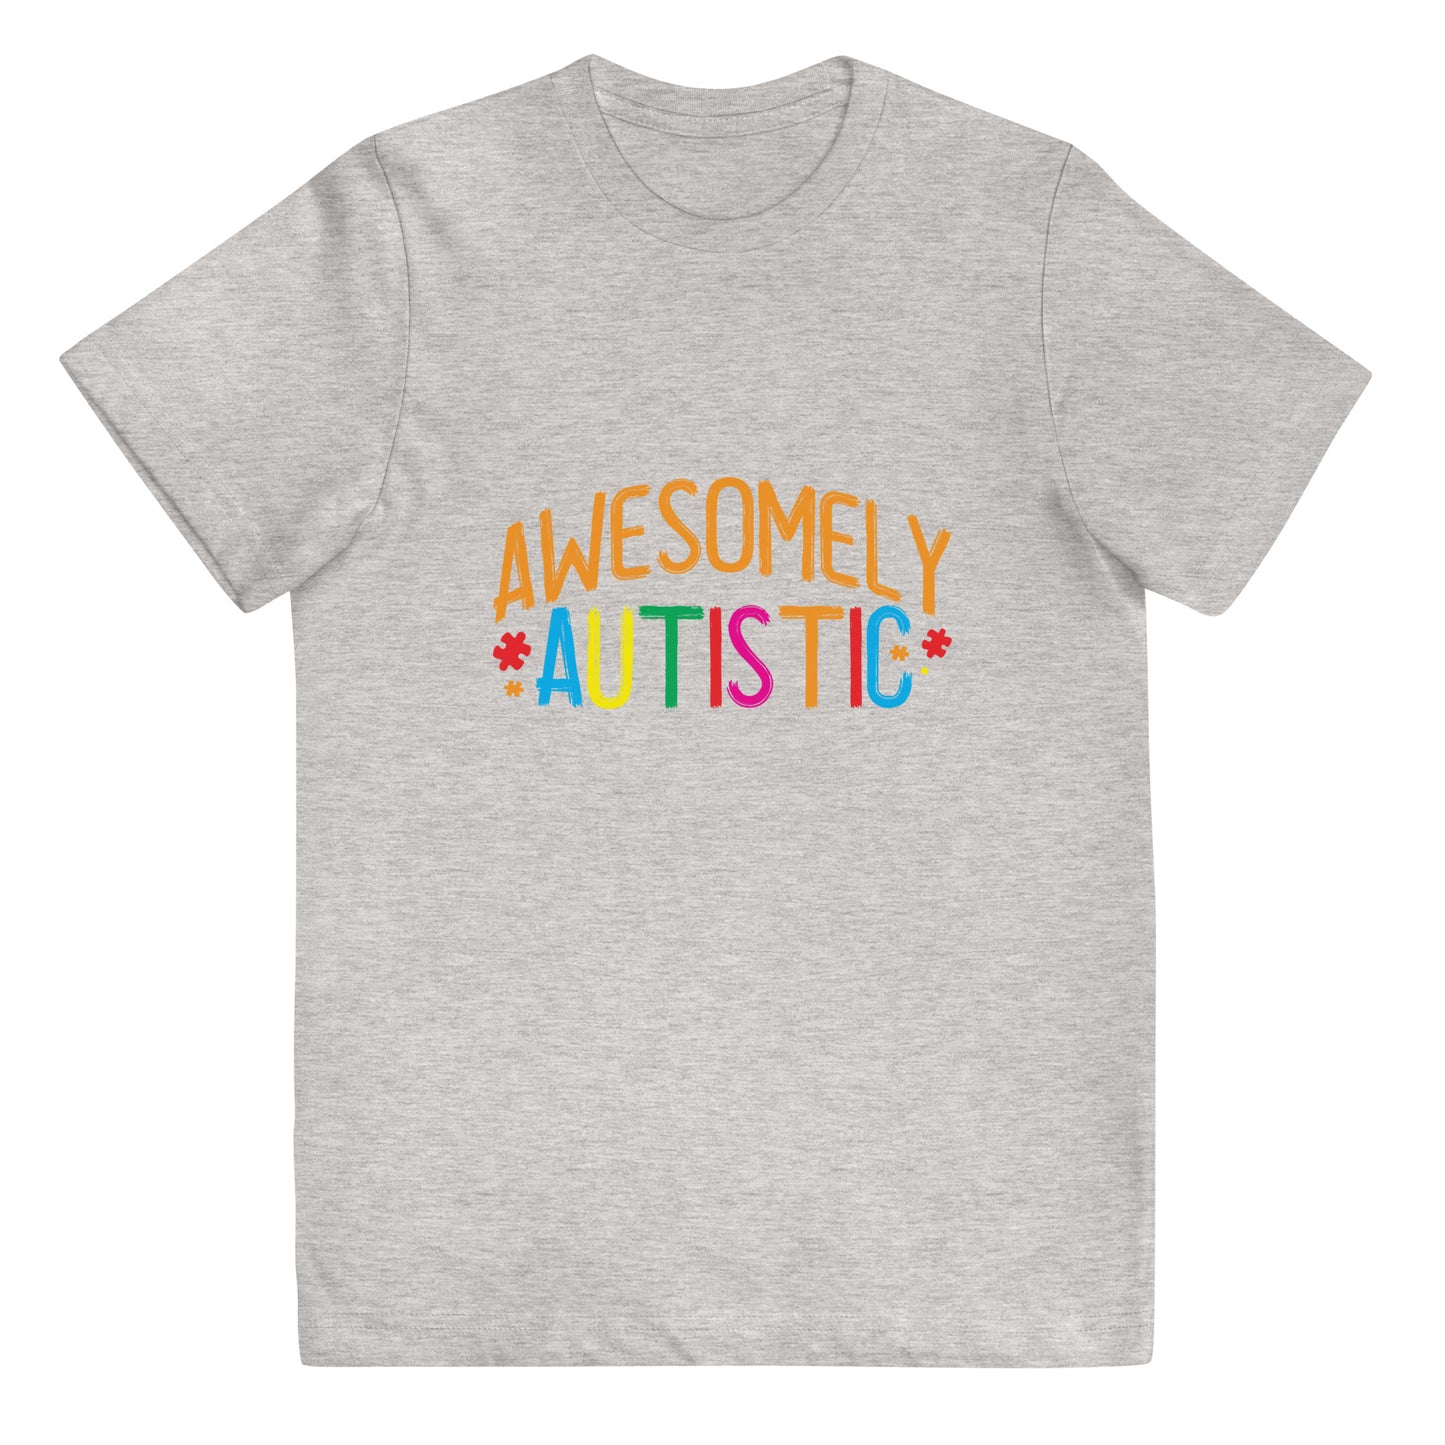 Awesomely Autistic Youth Tshirt